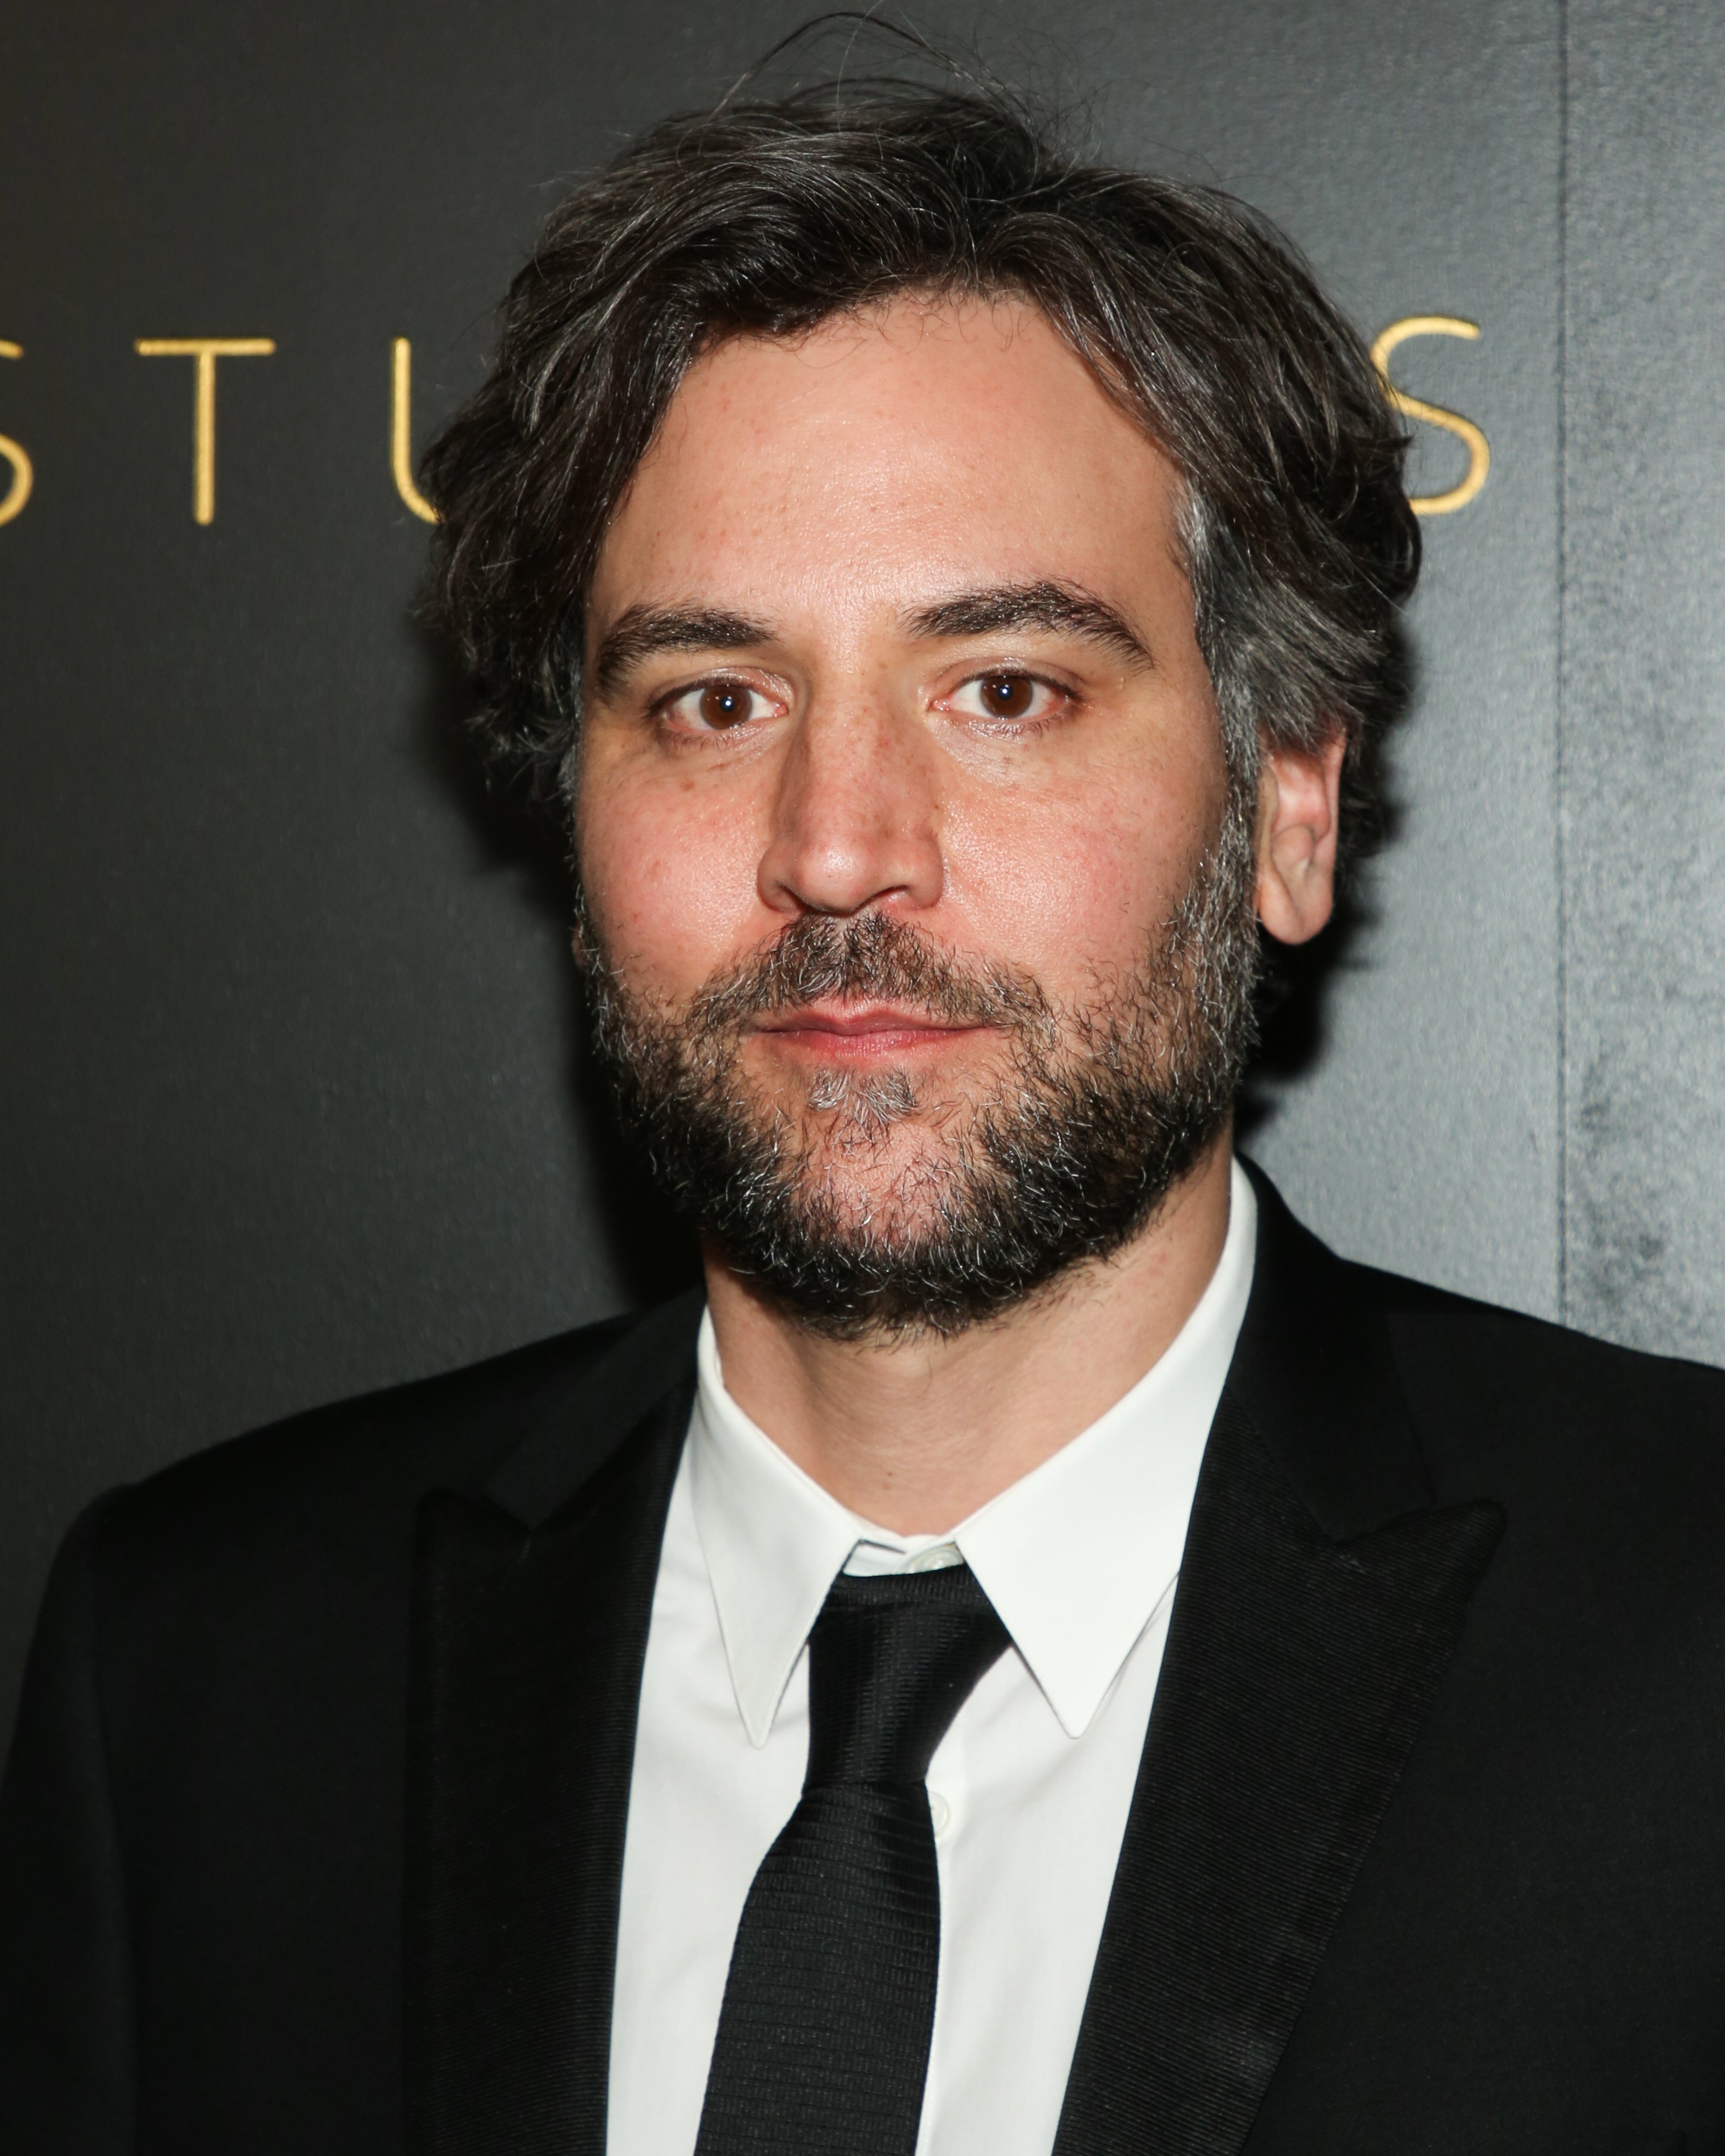 Actor Josh Radnor at Amazon Studios' Golden Globes after party on January 05, 2020, in California. | Source: Getty Images